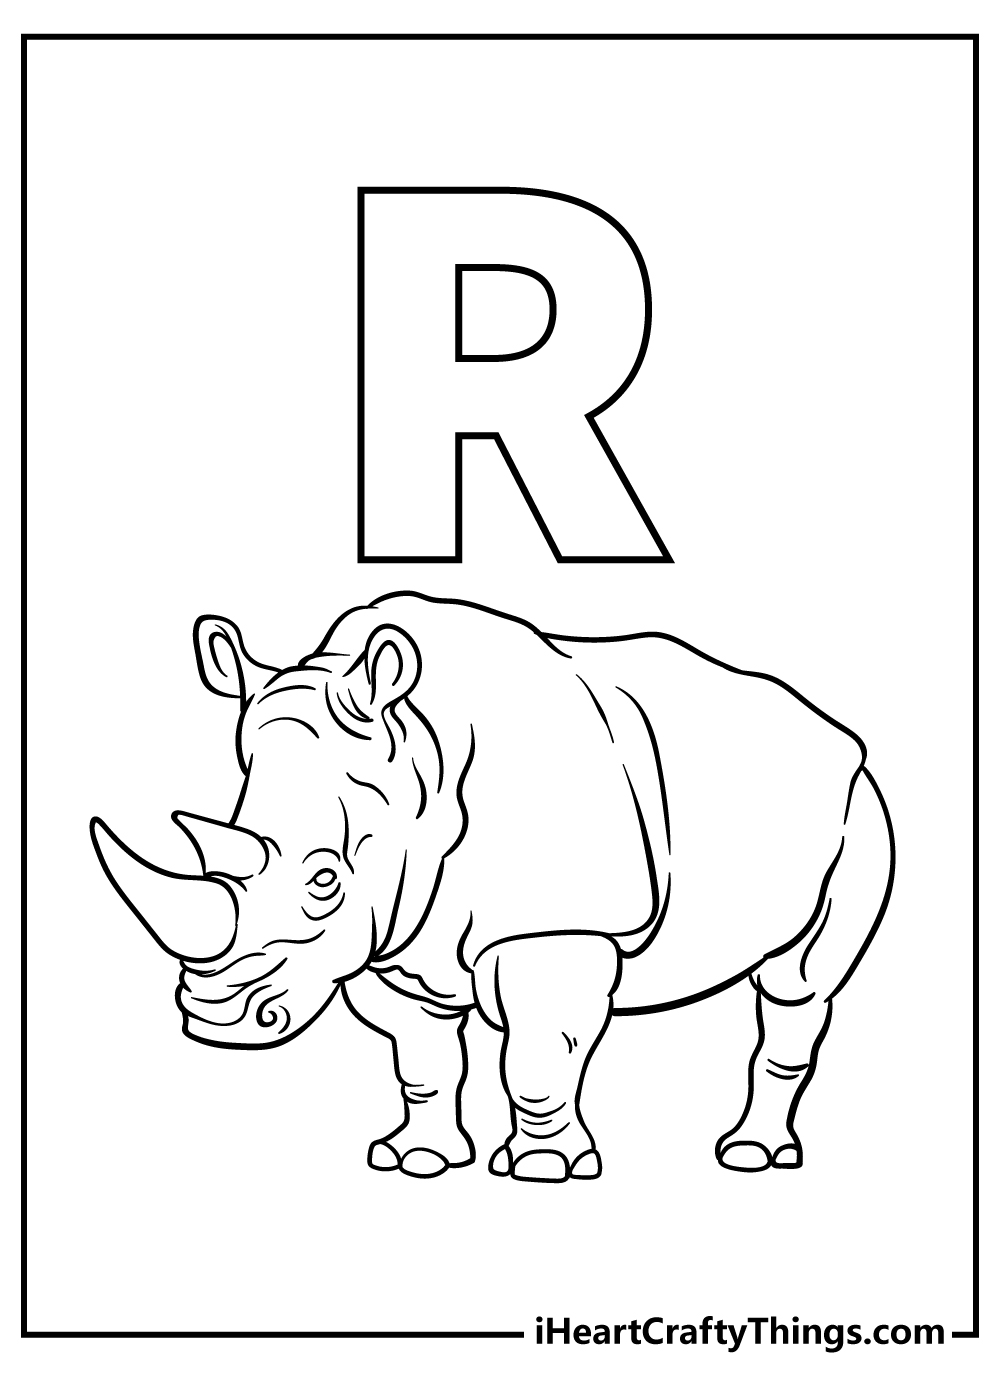 Letter R Coloring Pages for adults free printable